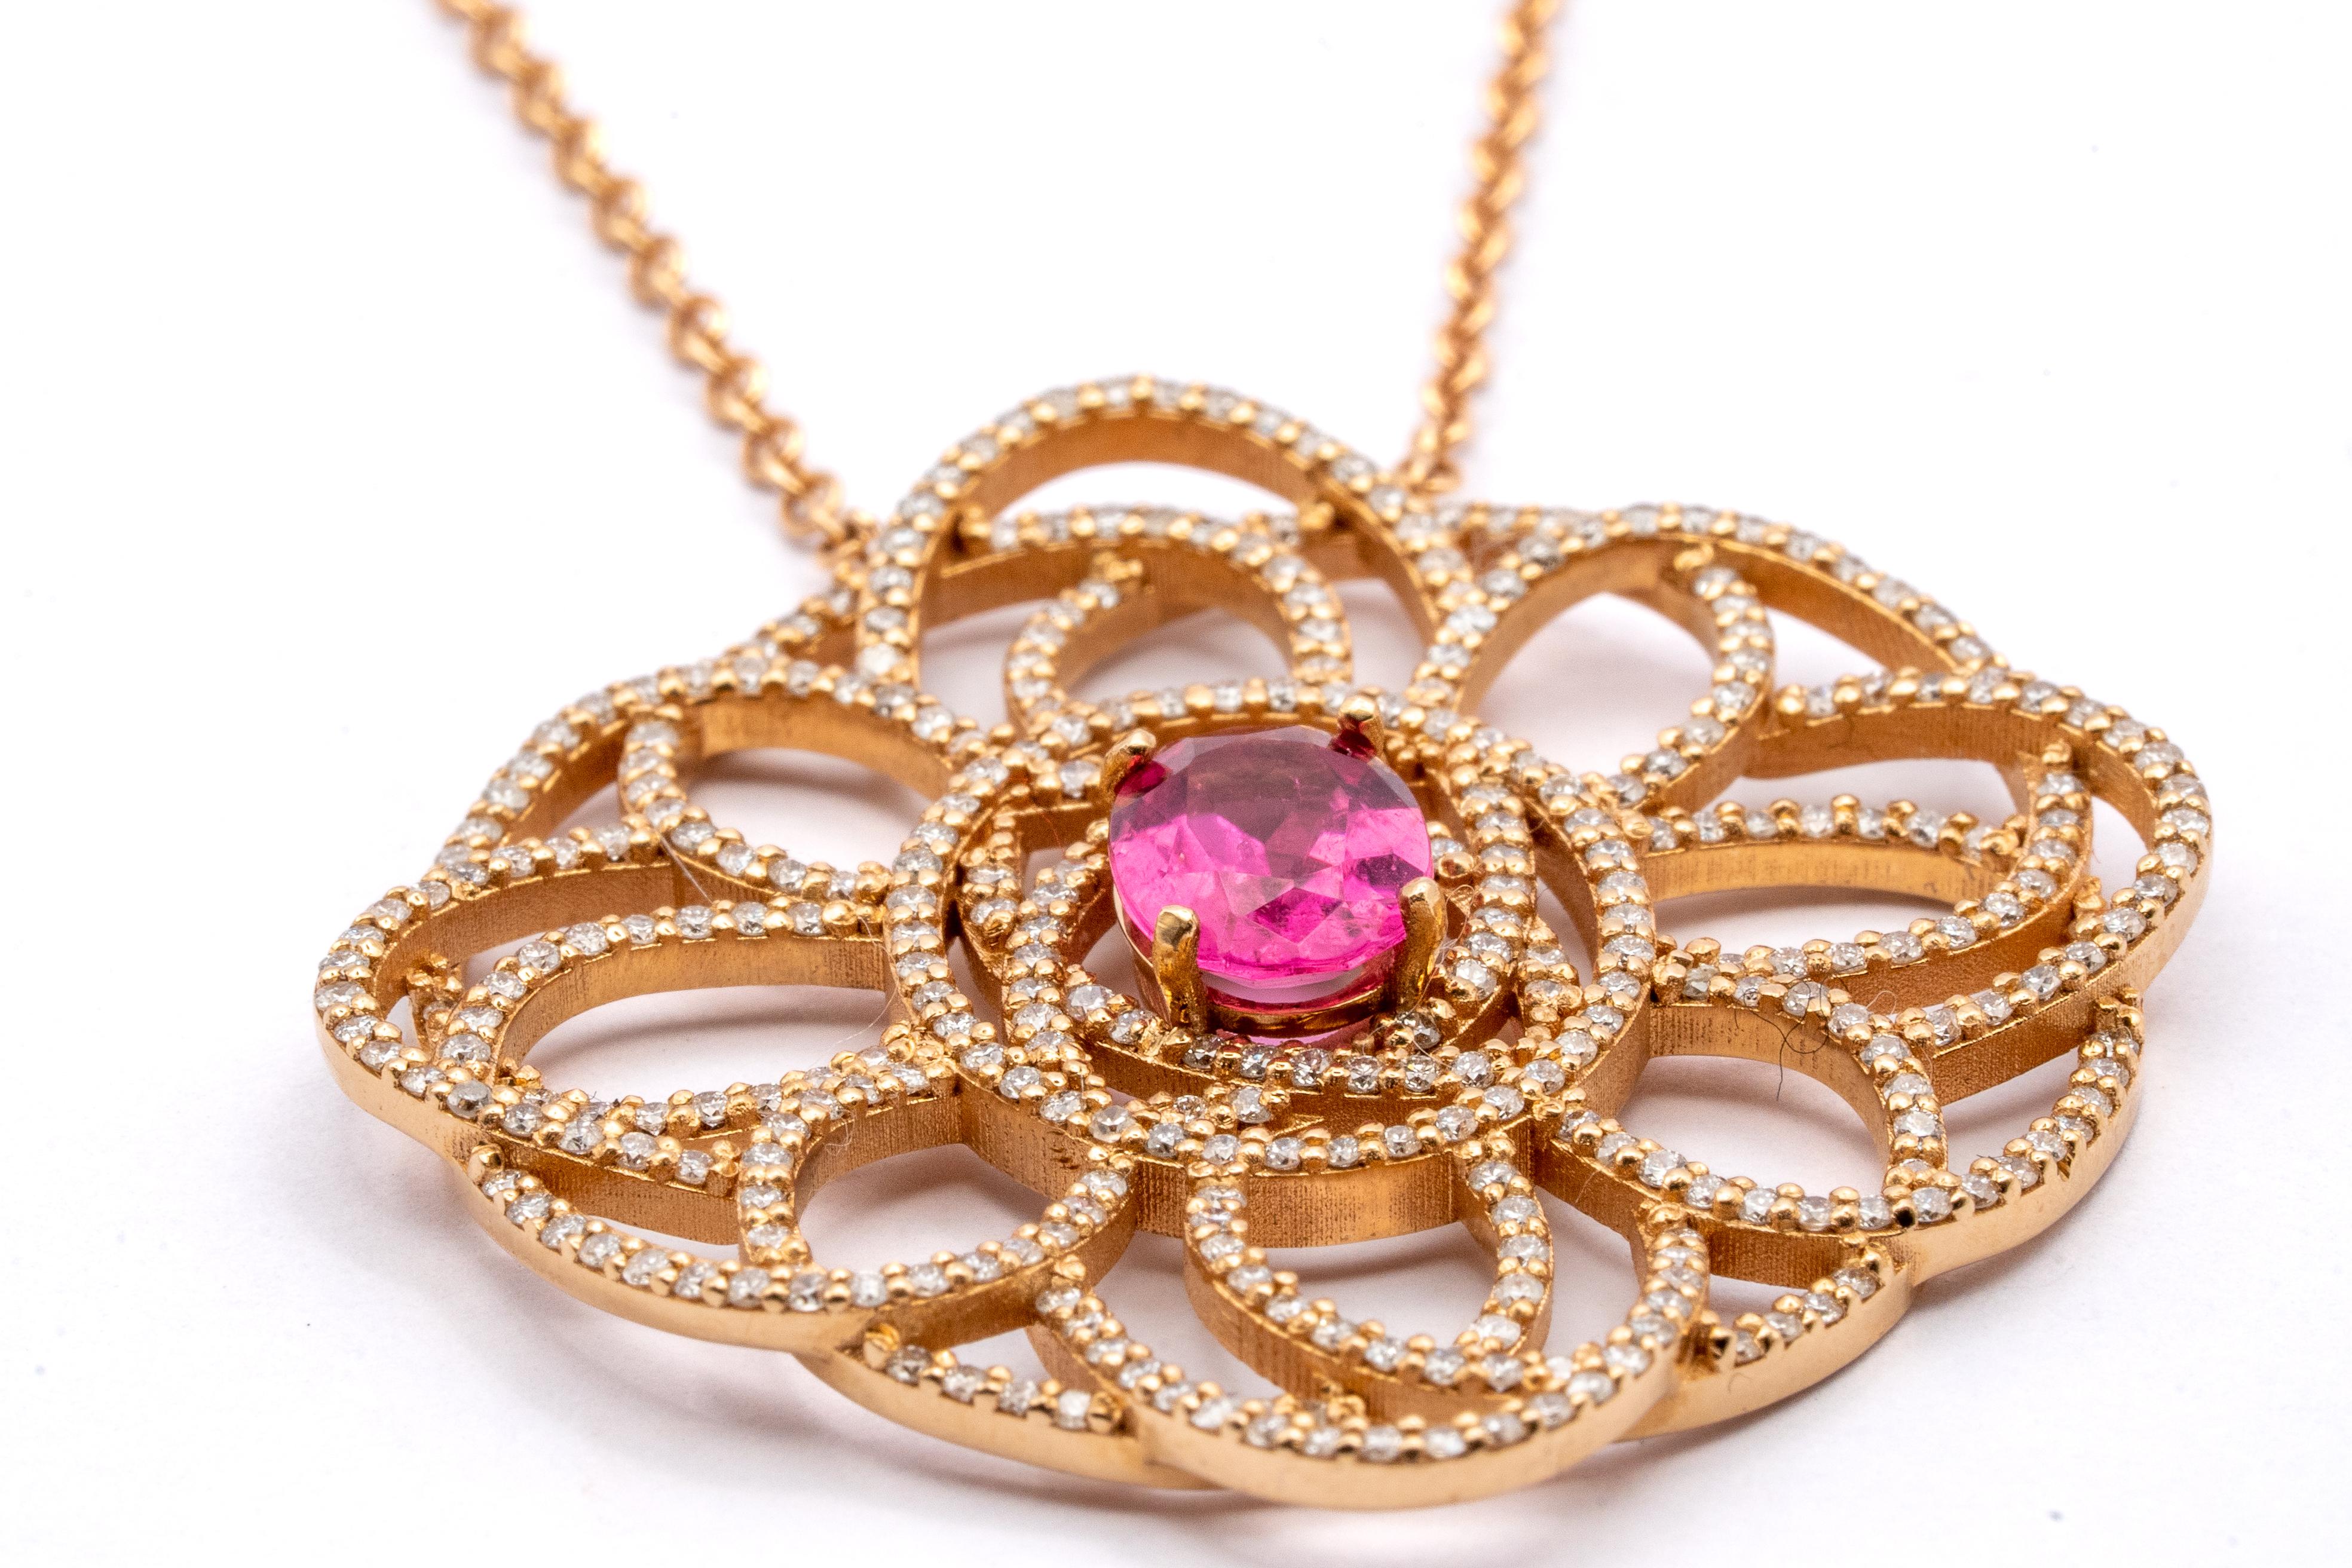 This beautiful pendant made of 18 carat rose gold for 9.12 grams boasts a central rubelite of 1.1 carat and 332 VS G color diamonds for a total of 1.7 carats. the lenght of the necklace is 42 centimeters
any item of our jewelry collection has a